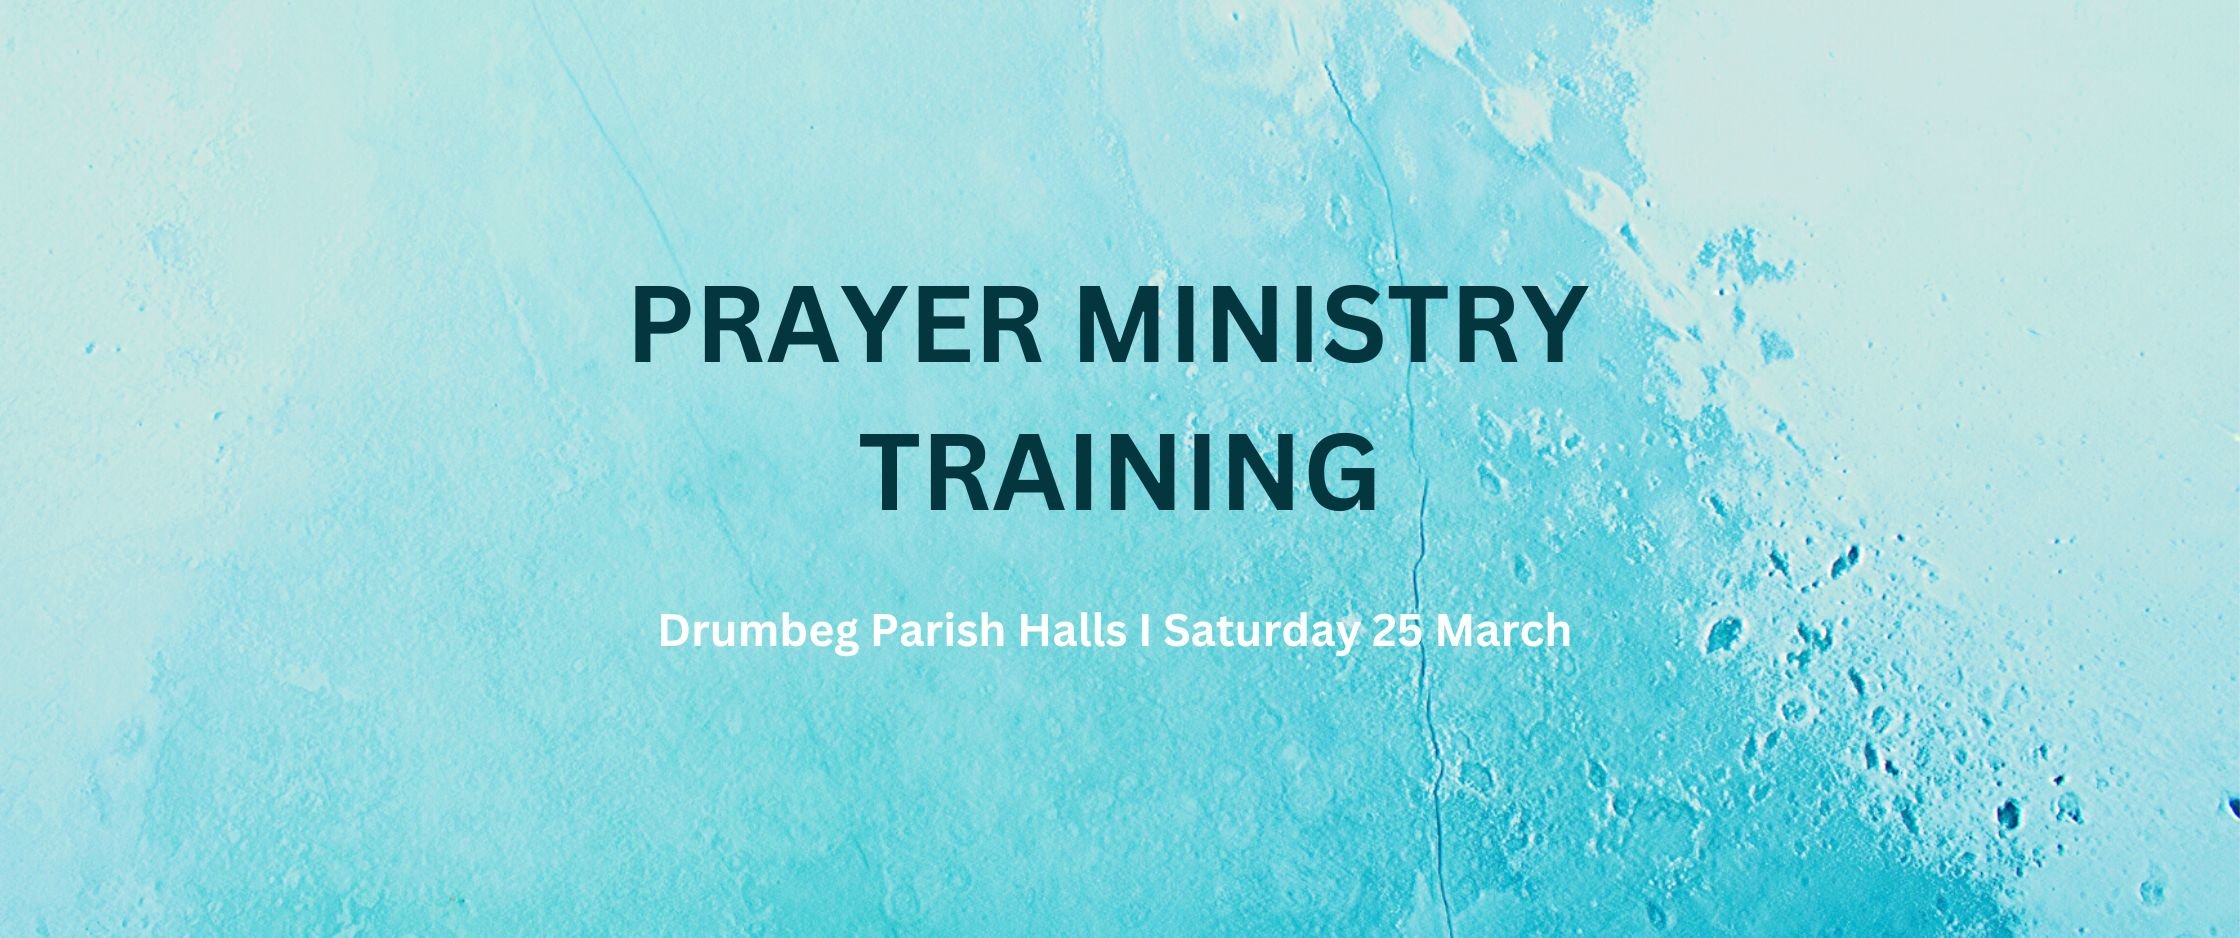 Sign up for Prayer Ministry Training